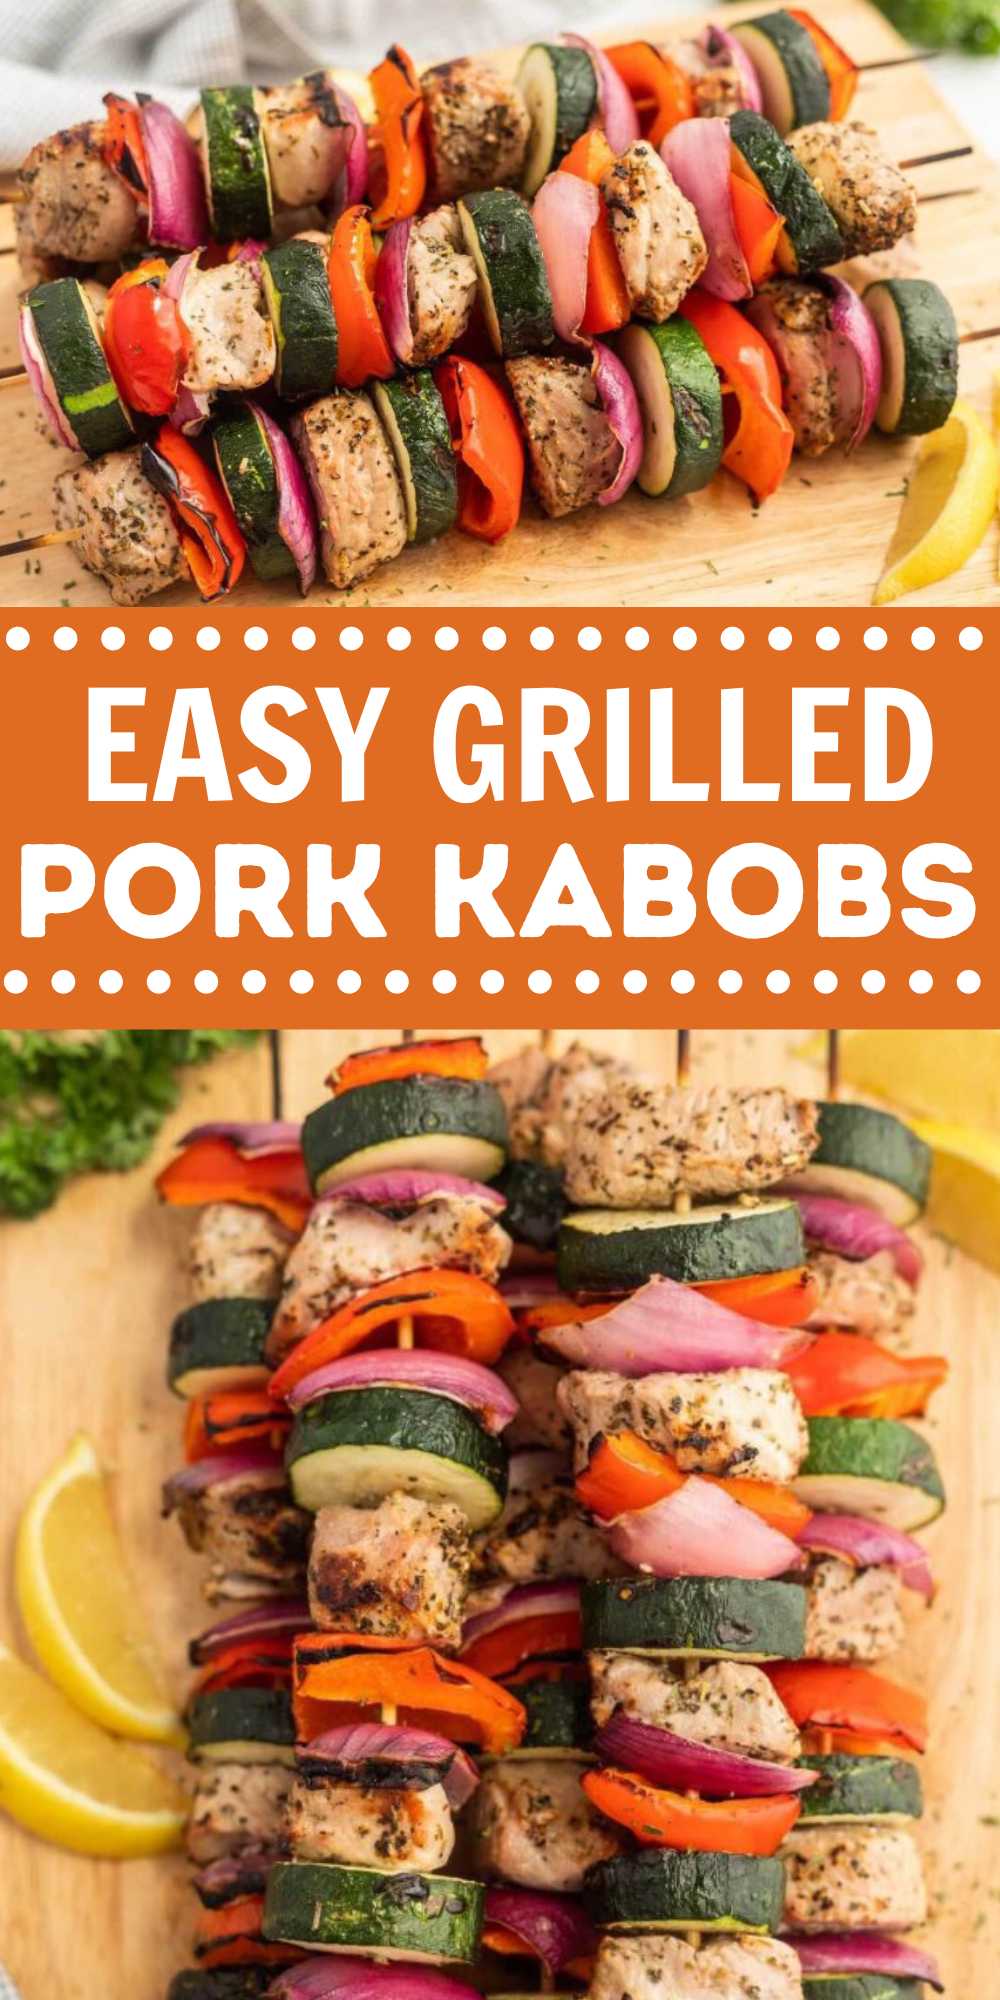 Grilled Pork Kabobs are layered with your favorite veggies and grilled to perfection. The marinade gives the pork and veggies great flavor. The kabobs are grilled perfectly and have the best flavor from the grill and seasoning. The veggies also make it an effortless way to stretch the meat.  #eatingonadime #grilledporkkabobs #porkkabobs #kabobs